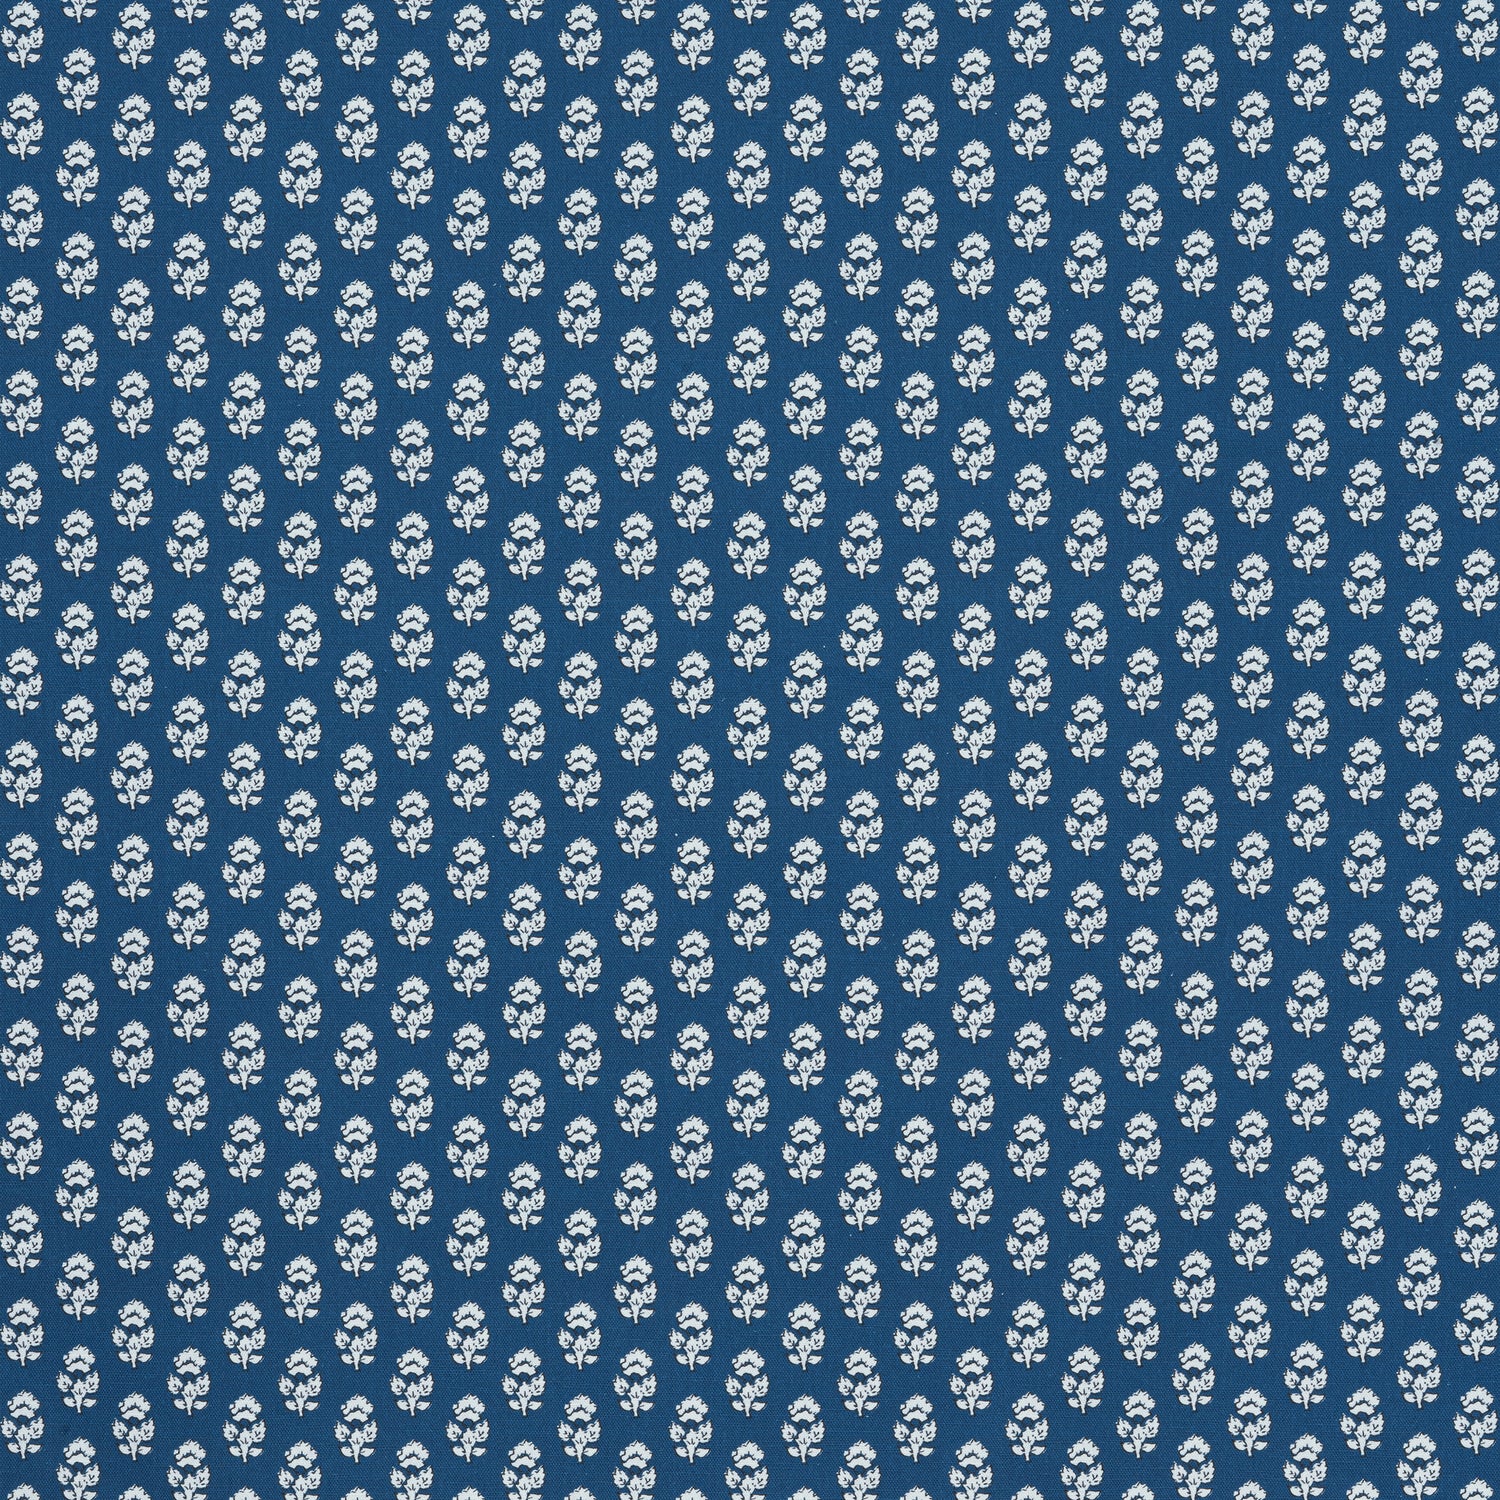 Julian fabric in navy color - pattern number AF15163 - by Anna French in the Antilles collection